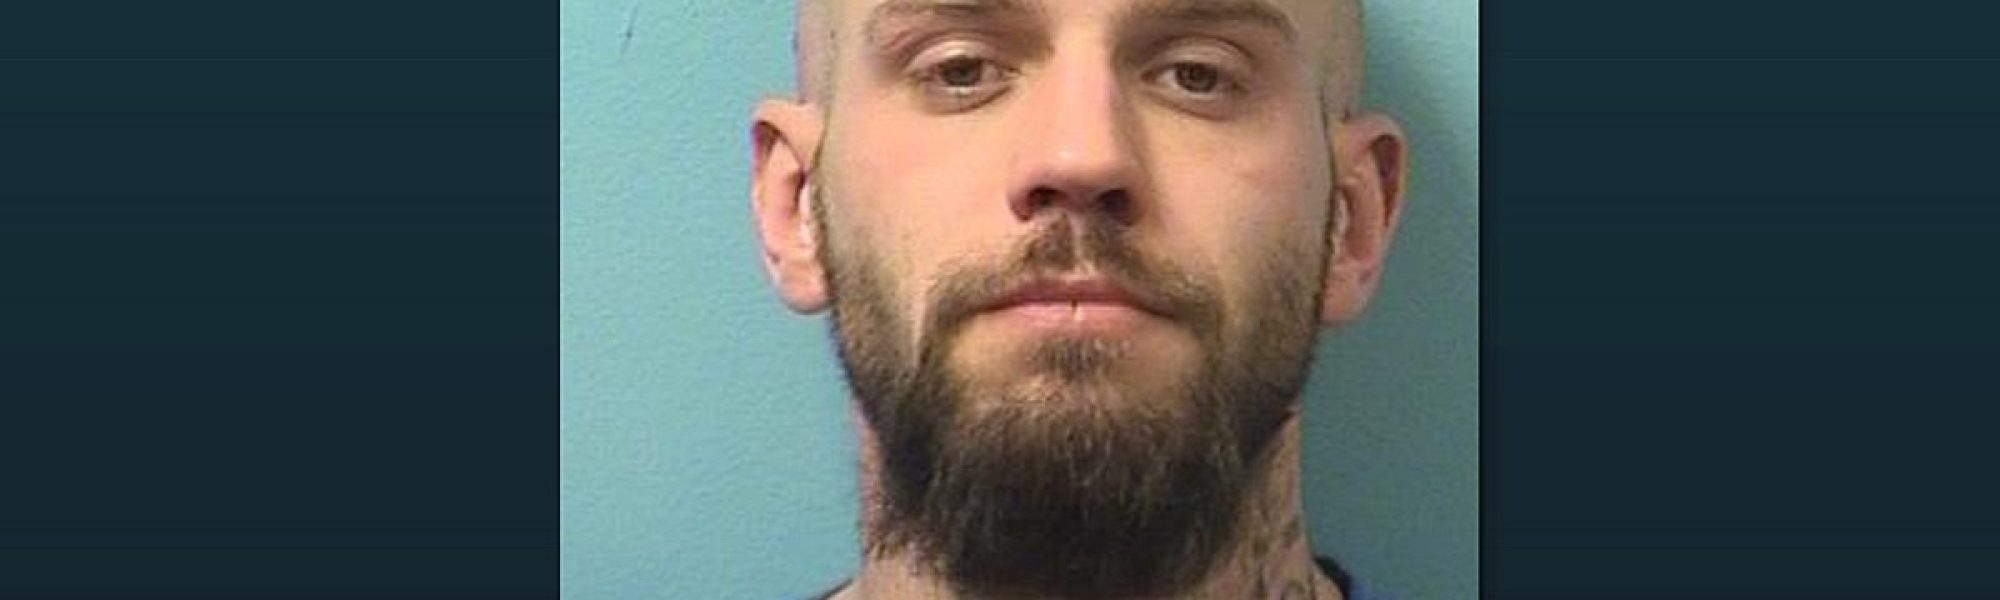 St. Cloud Man Charged After Police Chase in Cold Spring